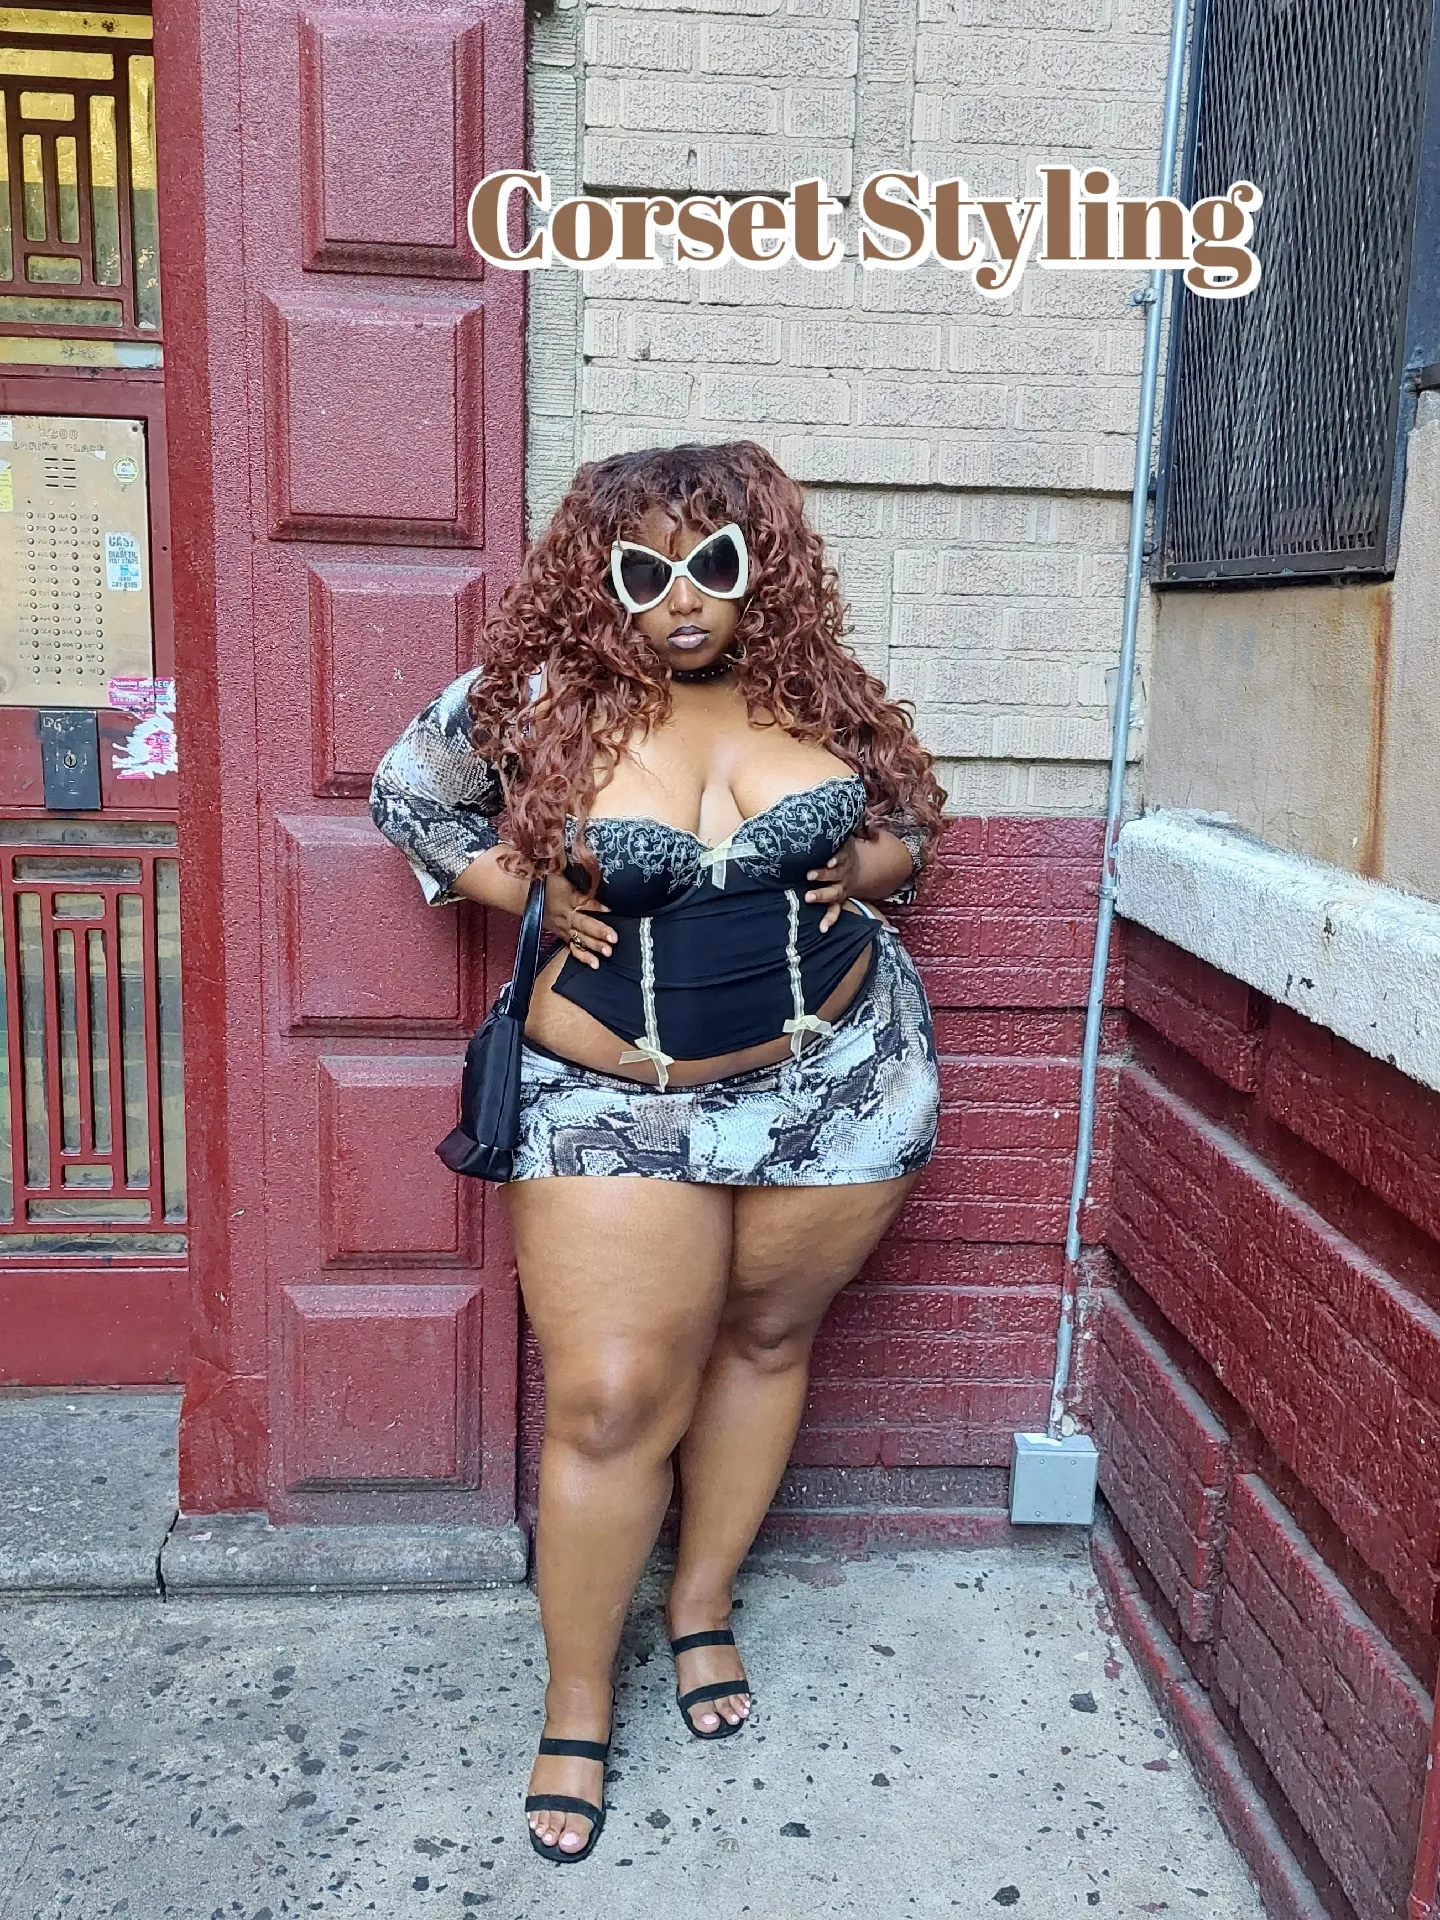 Styling an under bust corset on a size 16/18